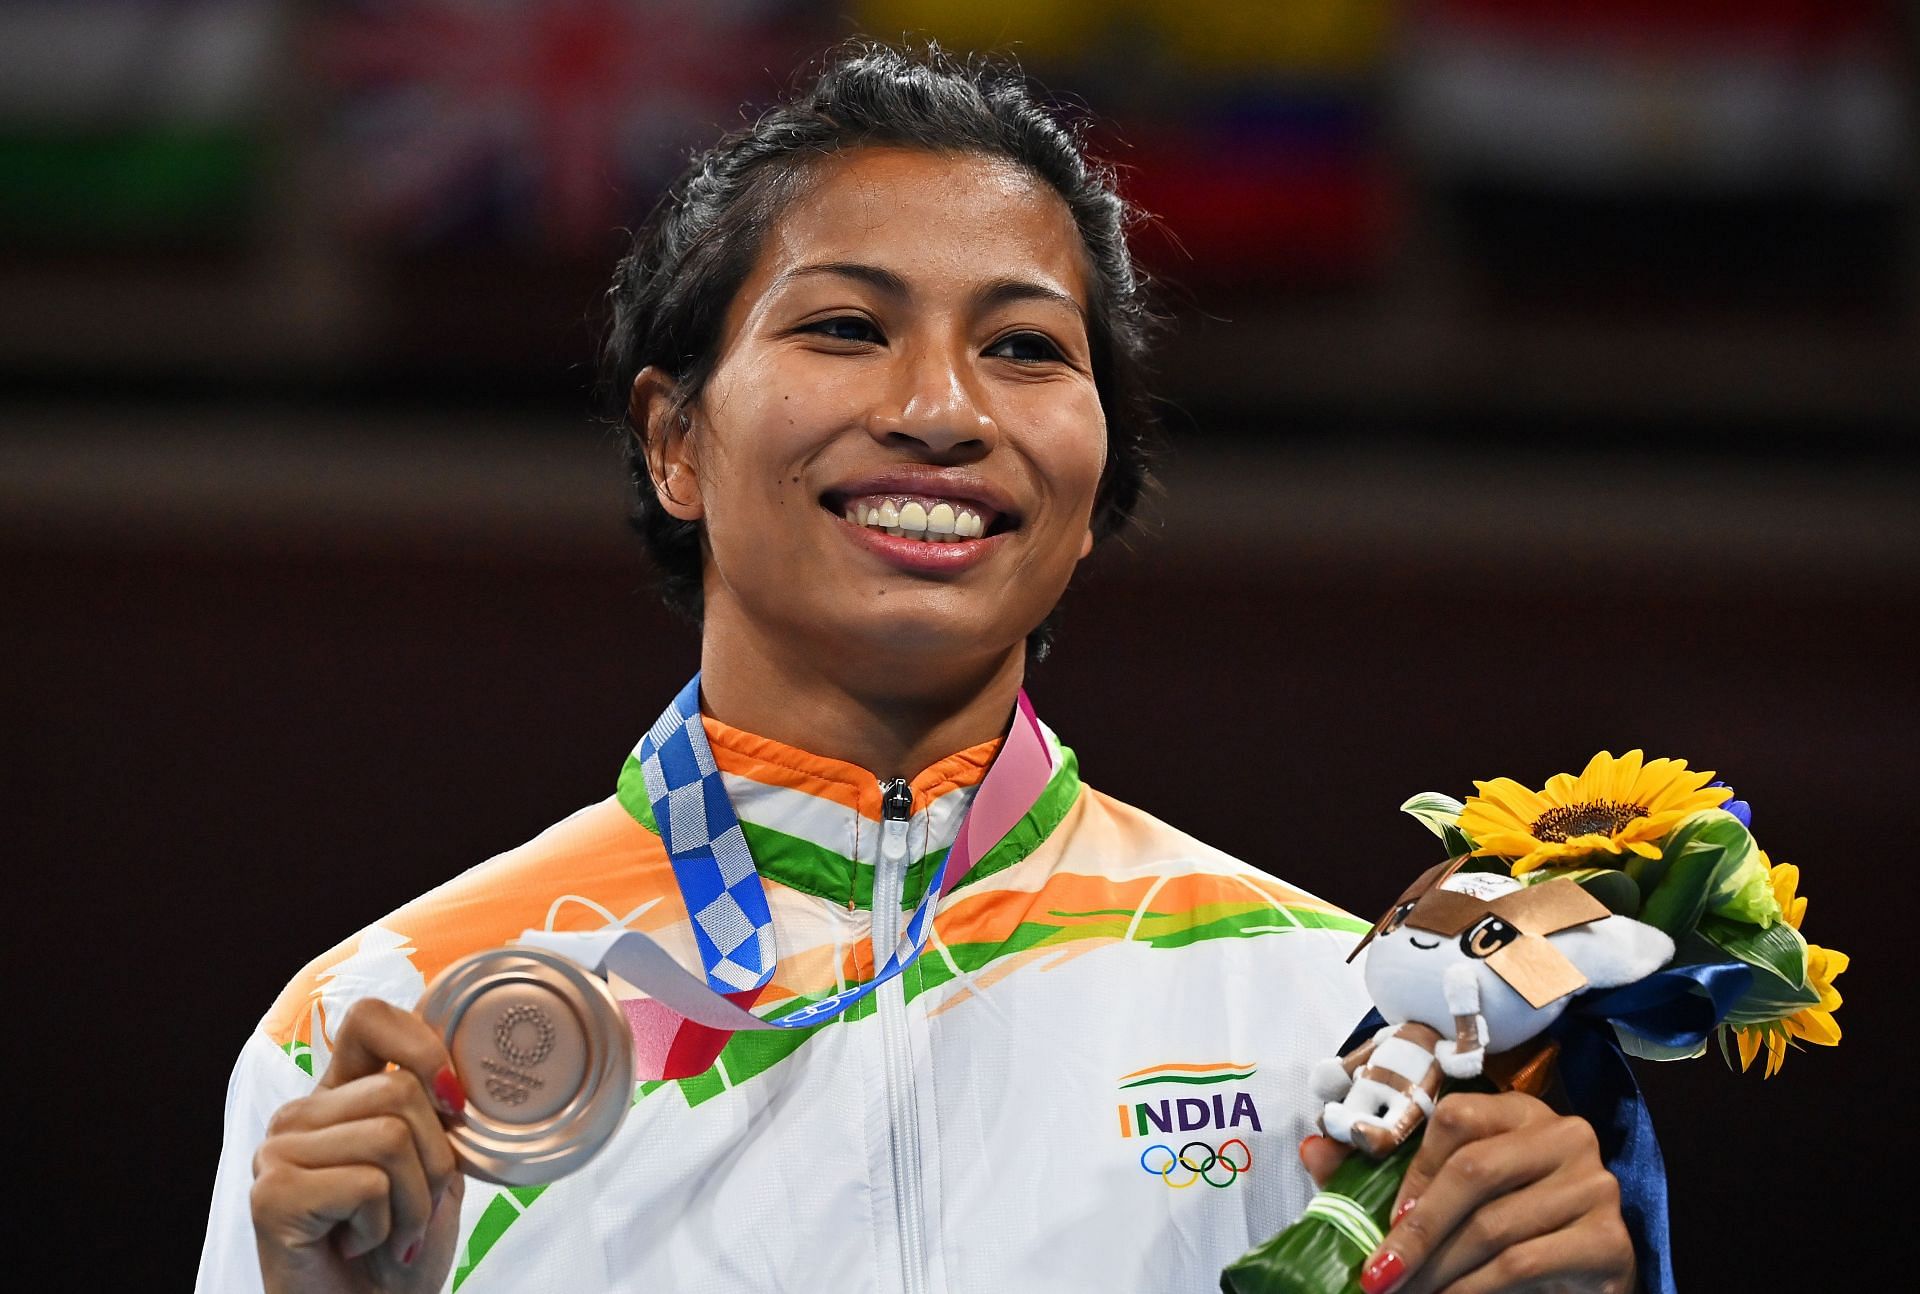 Lovlina Borgohain will be competing in the World Boxing Championships